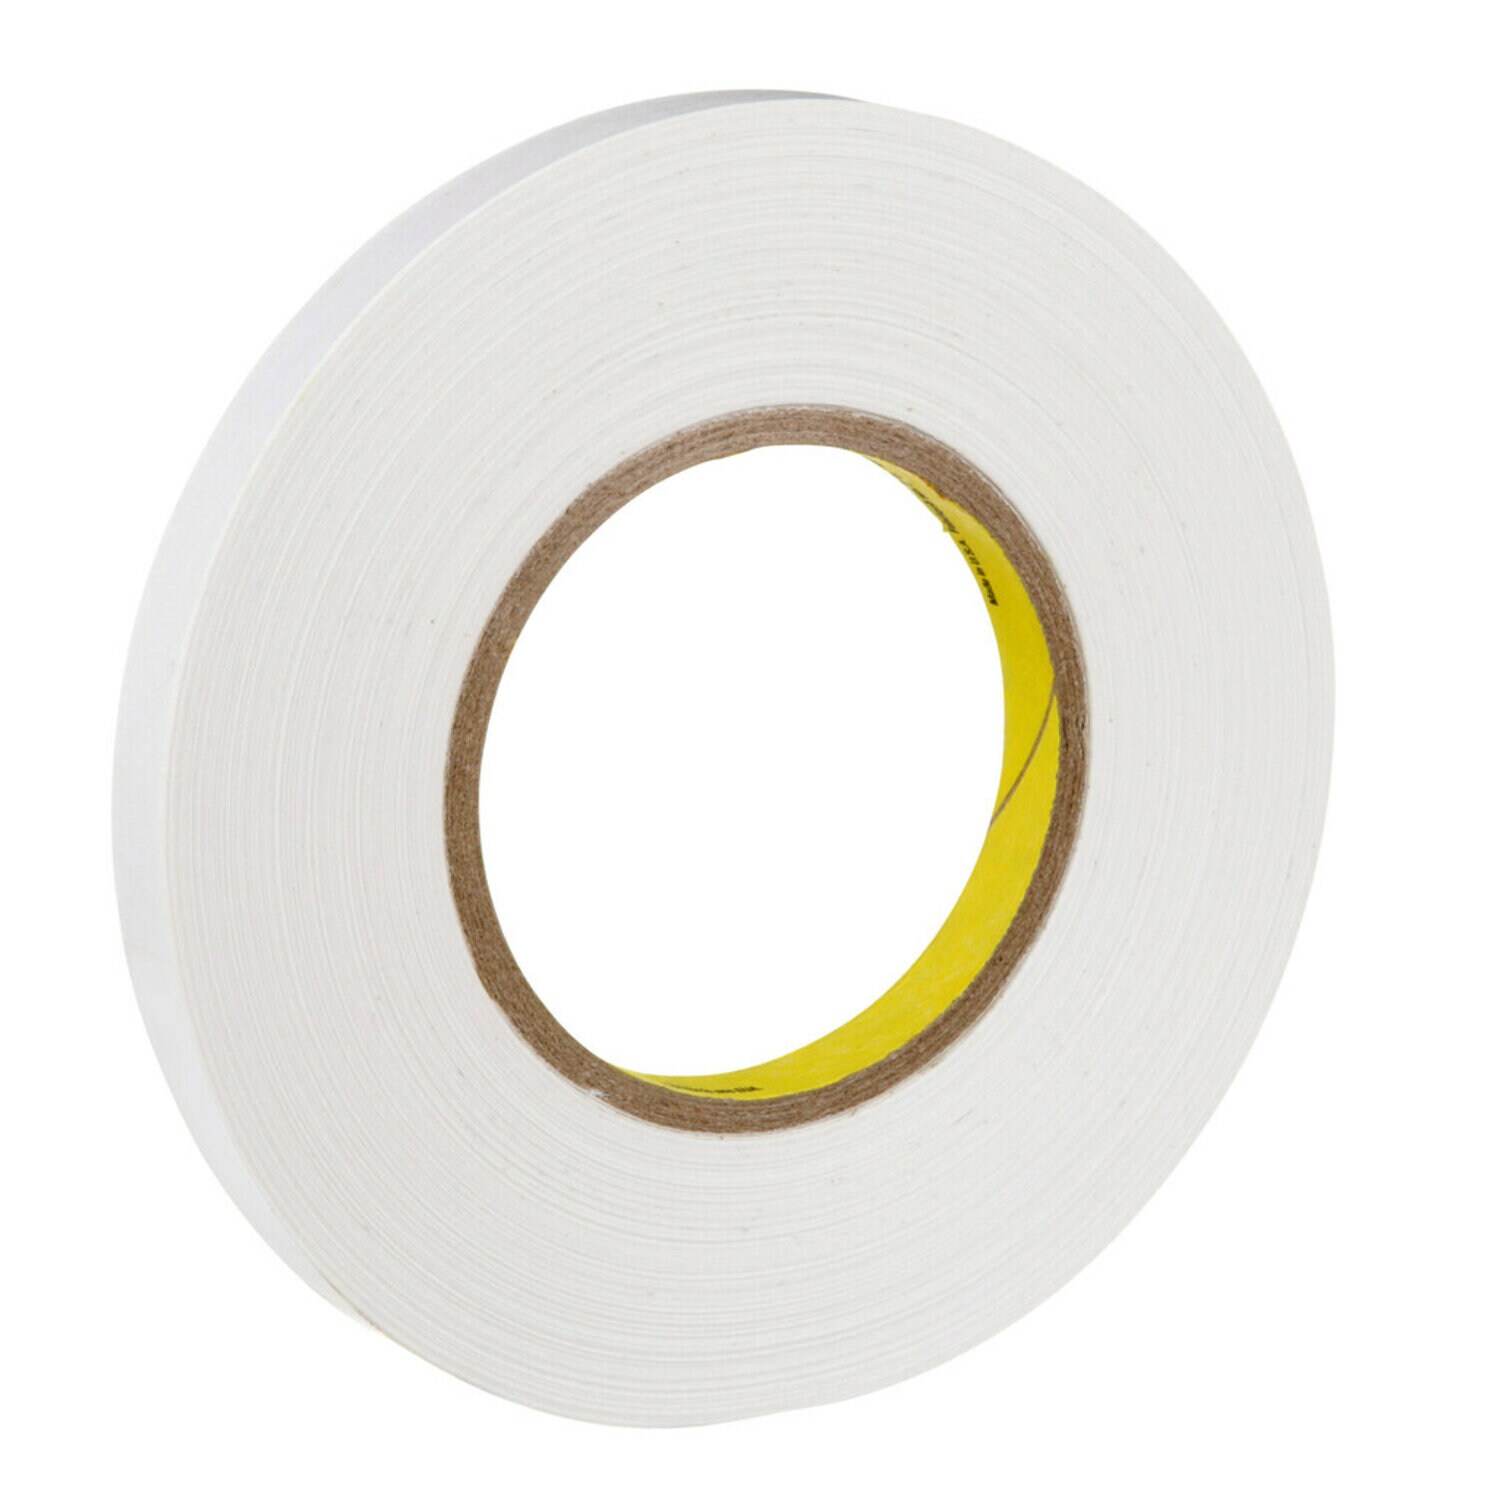 7100013071 - 3M Removable Repositionable Tape 9416, White, Roll, Config